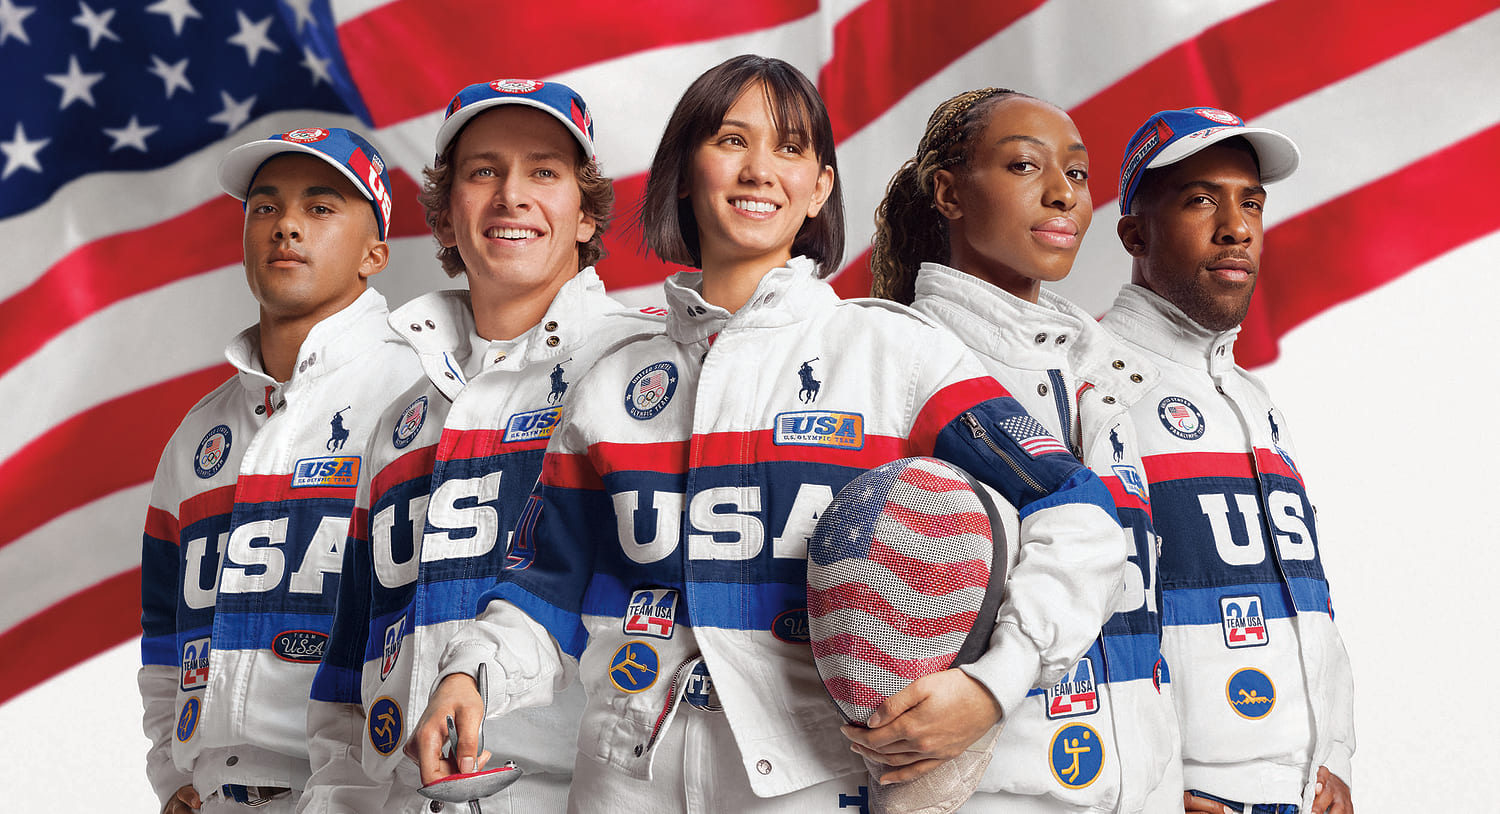 Ralph Lauren reveals Paris-inspired opening and closing ceremony uniforms for 2024 Olympics 